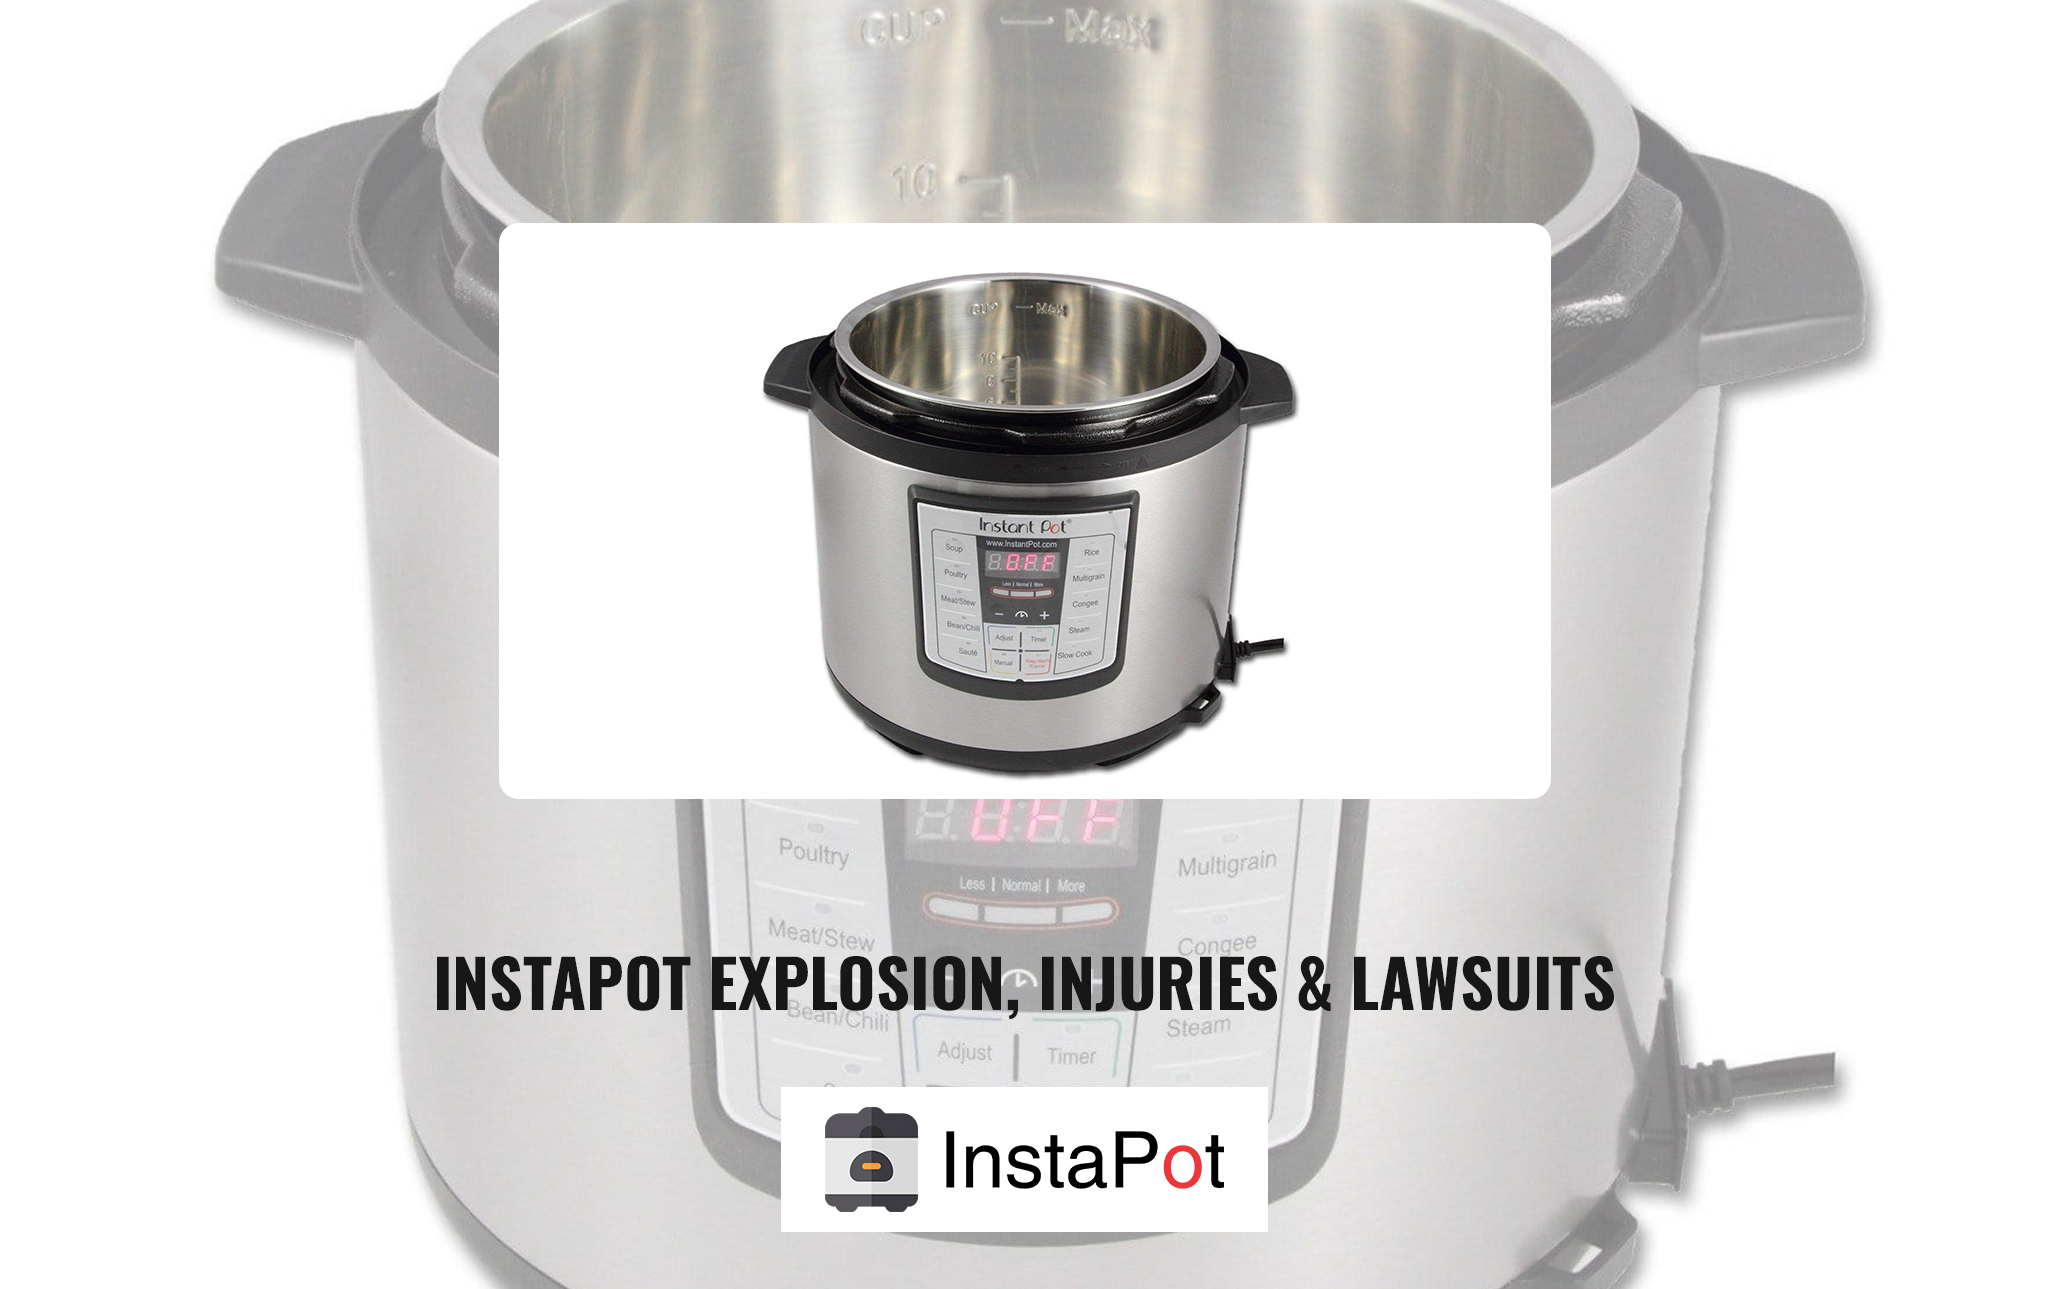 Instapot Explosion, Injuries & Lawsuits